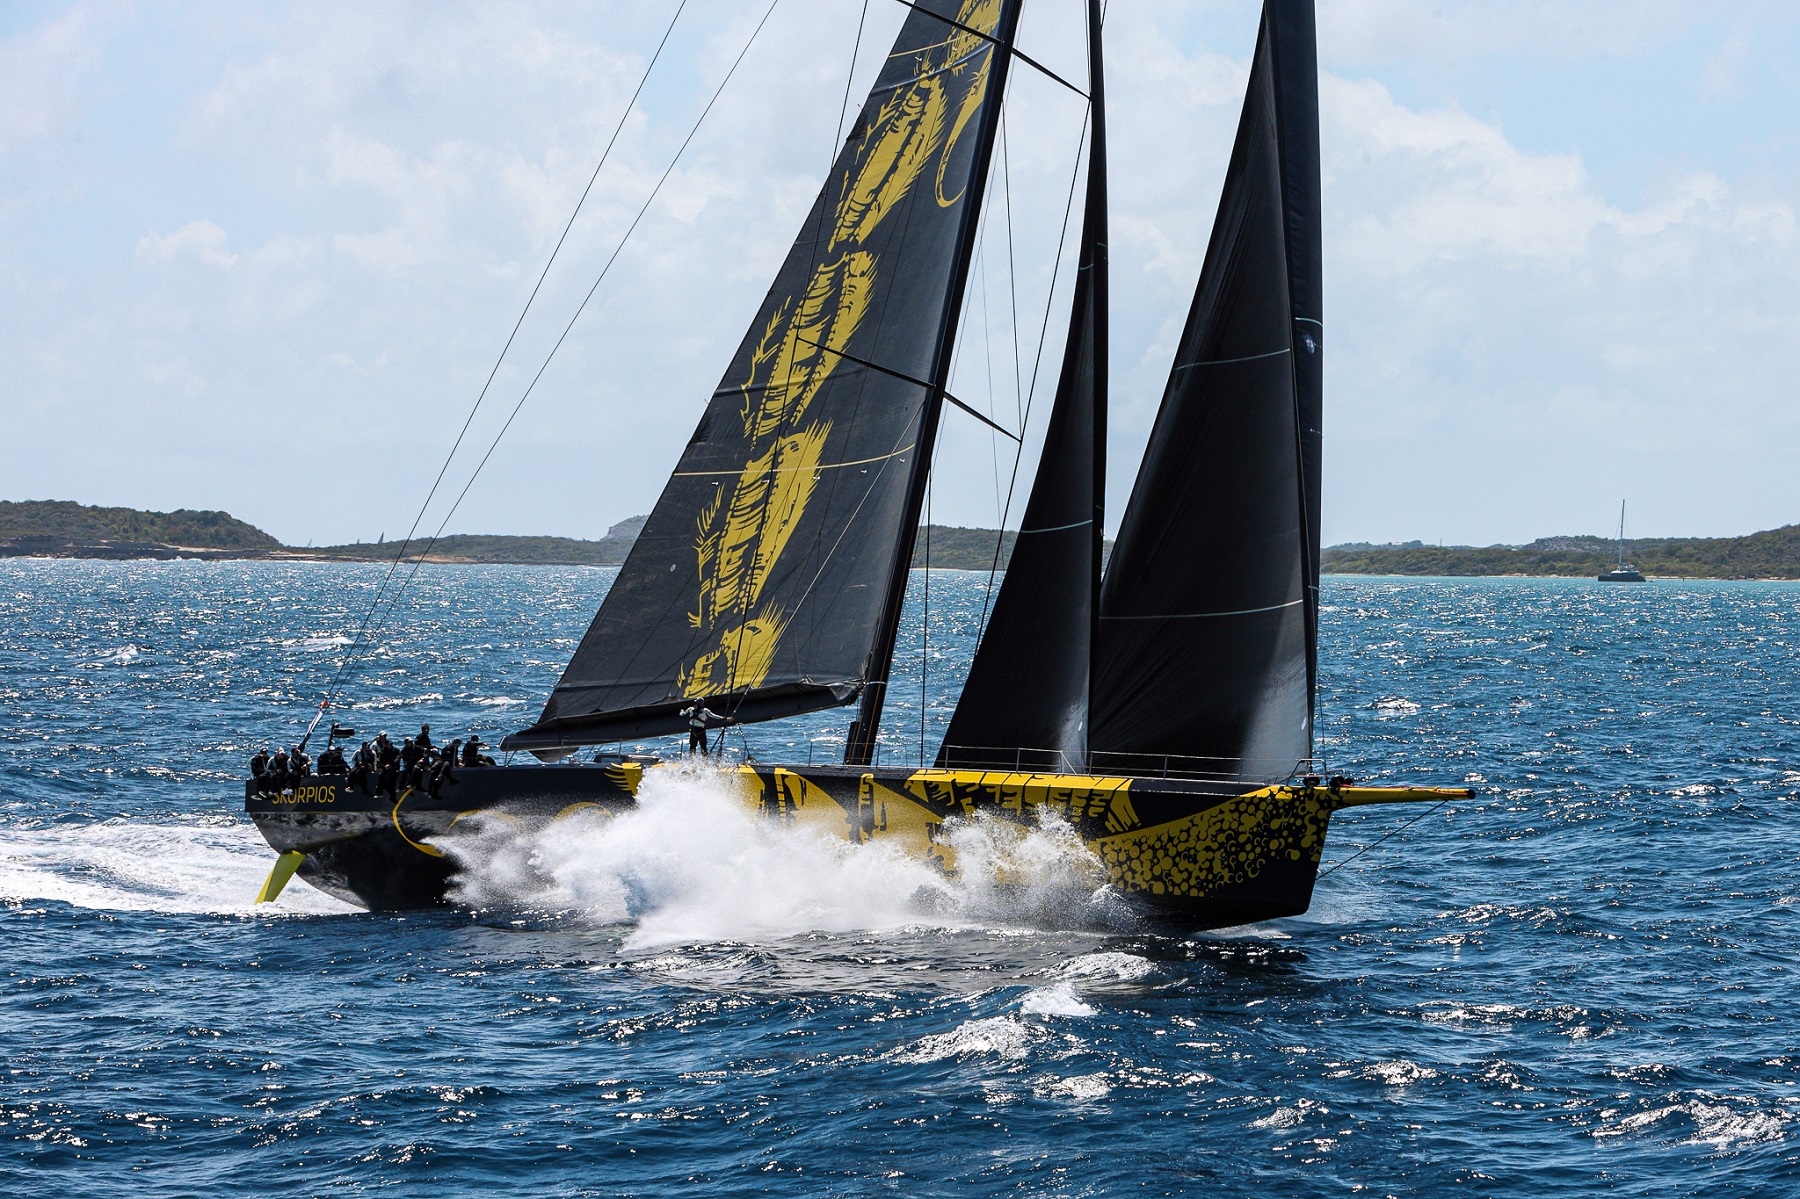 Dmitry Rybolovlev’s ClubSwan 125 Skorpios (MON), skippered by Fernando Echavarri, crossed the finish line in Antigua to take Monohull Line Honours at 03:59:51 on Wednesday 23rd February 2022. The elapsed time was 1 day, 16 hours, 39 mins, 51 secs. © Tim Wright/Photoaction.com